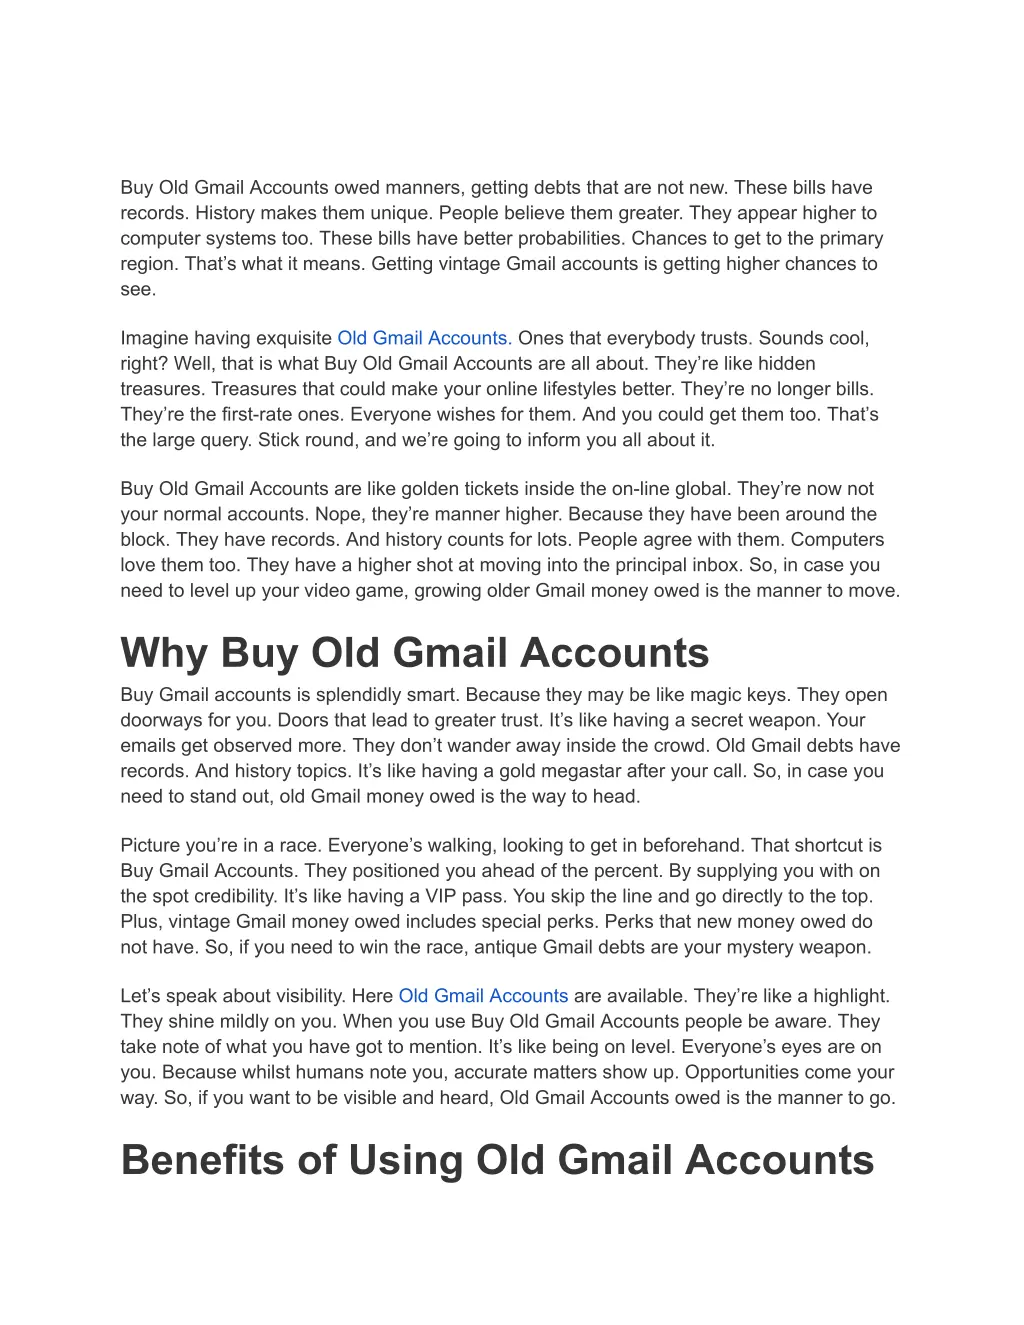 buy old gmail accounts owed manners getting debts